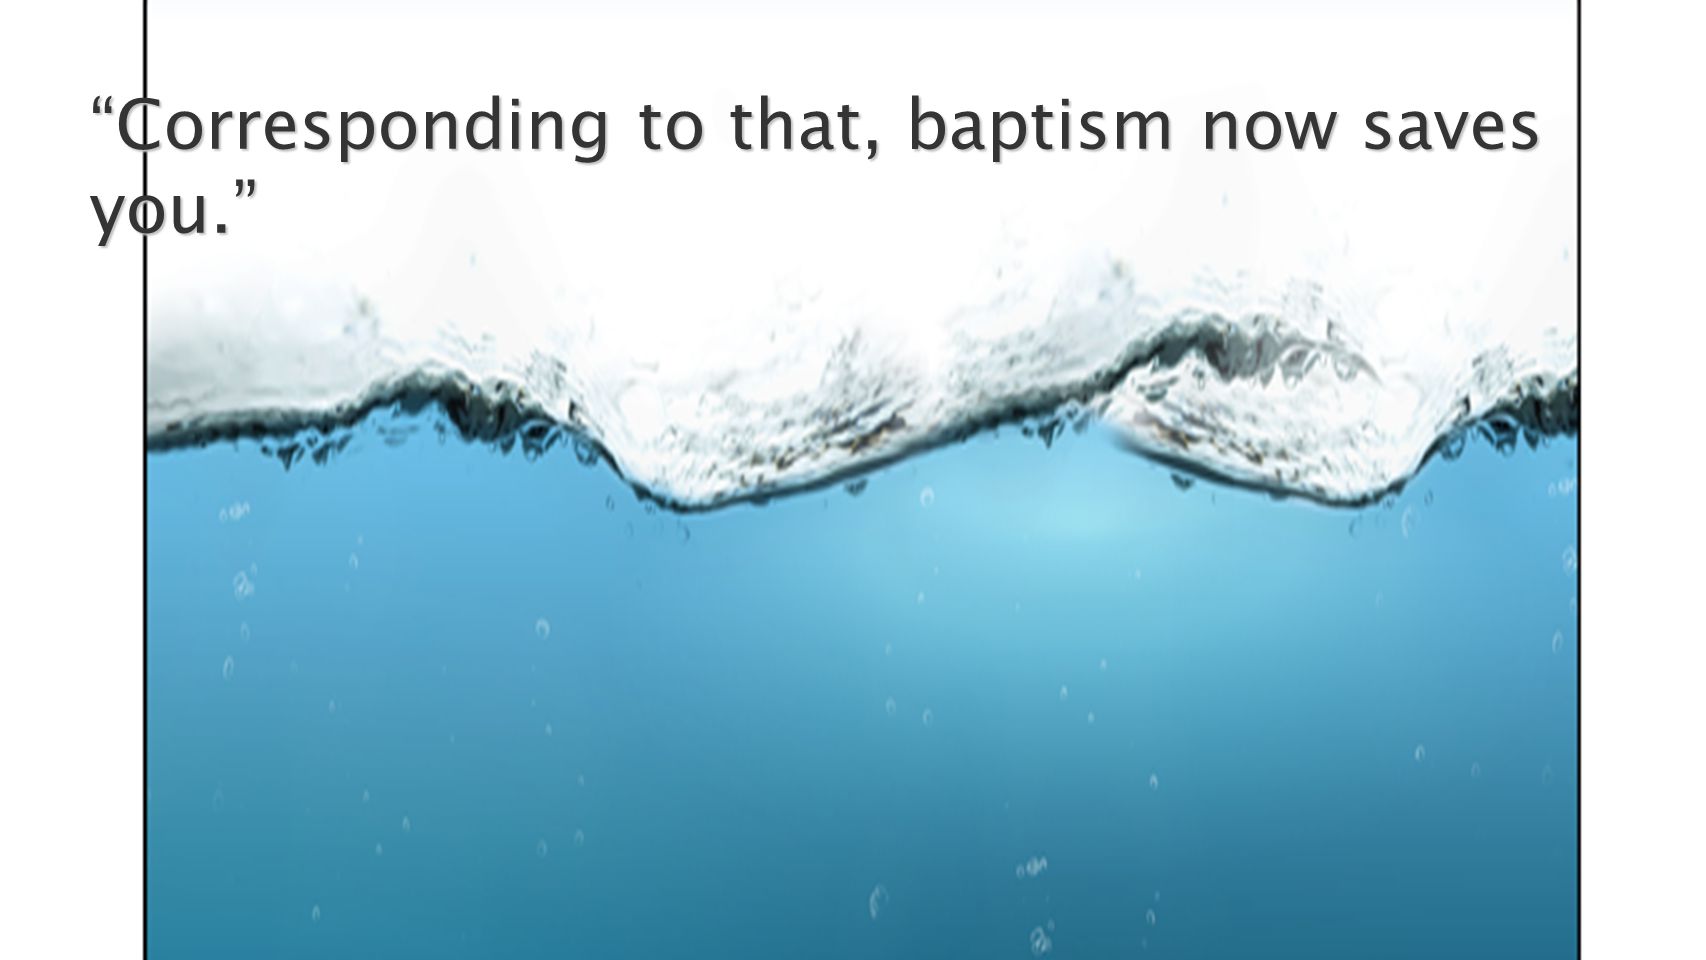 Corresponding to that, baptism now saves you.